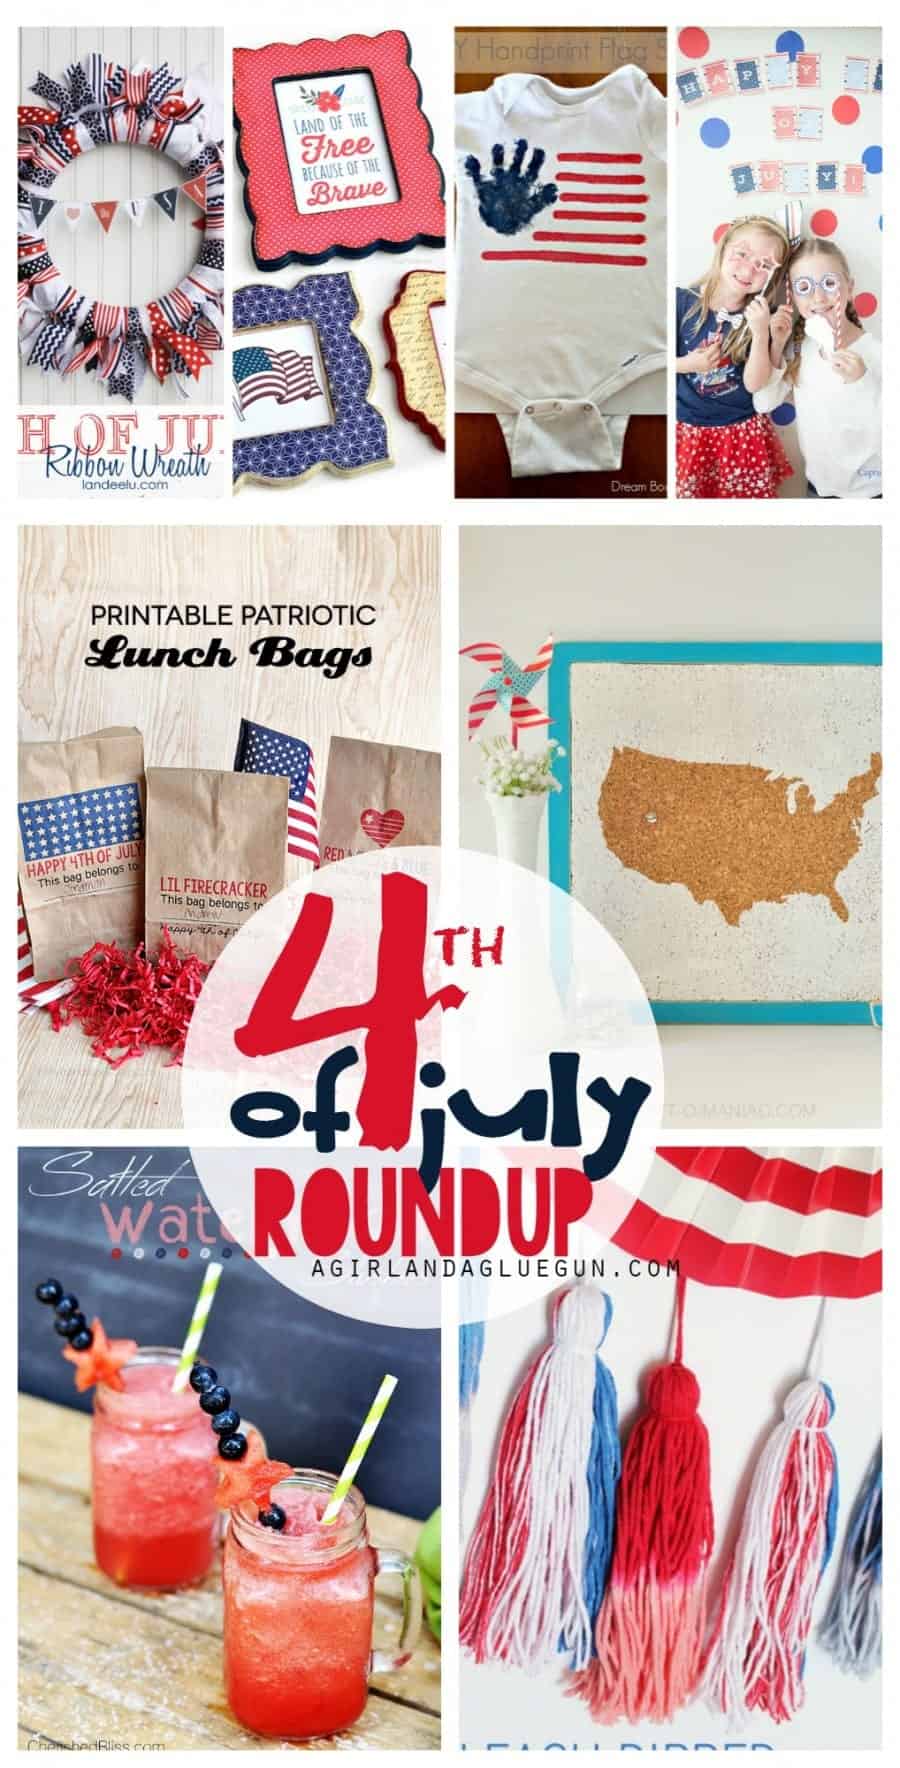 4th of July roundup